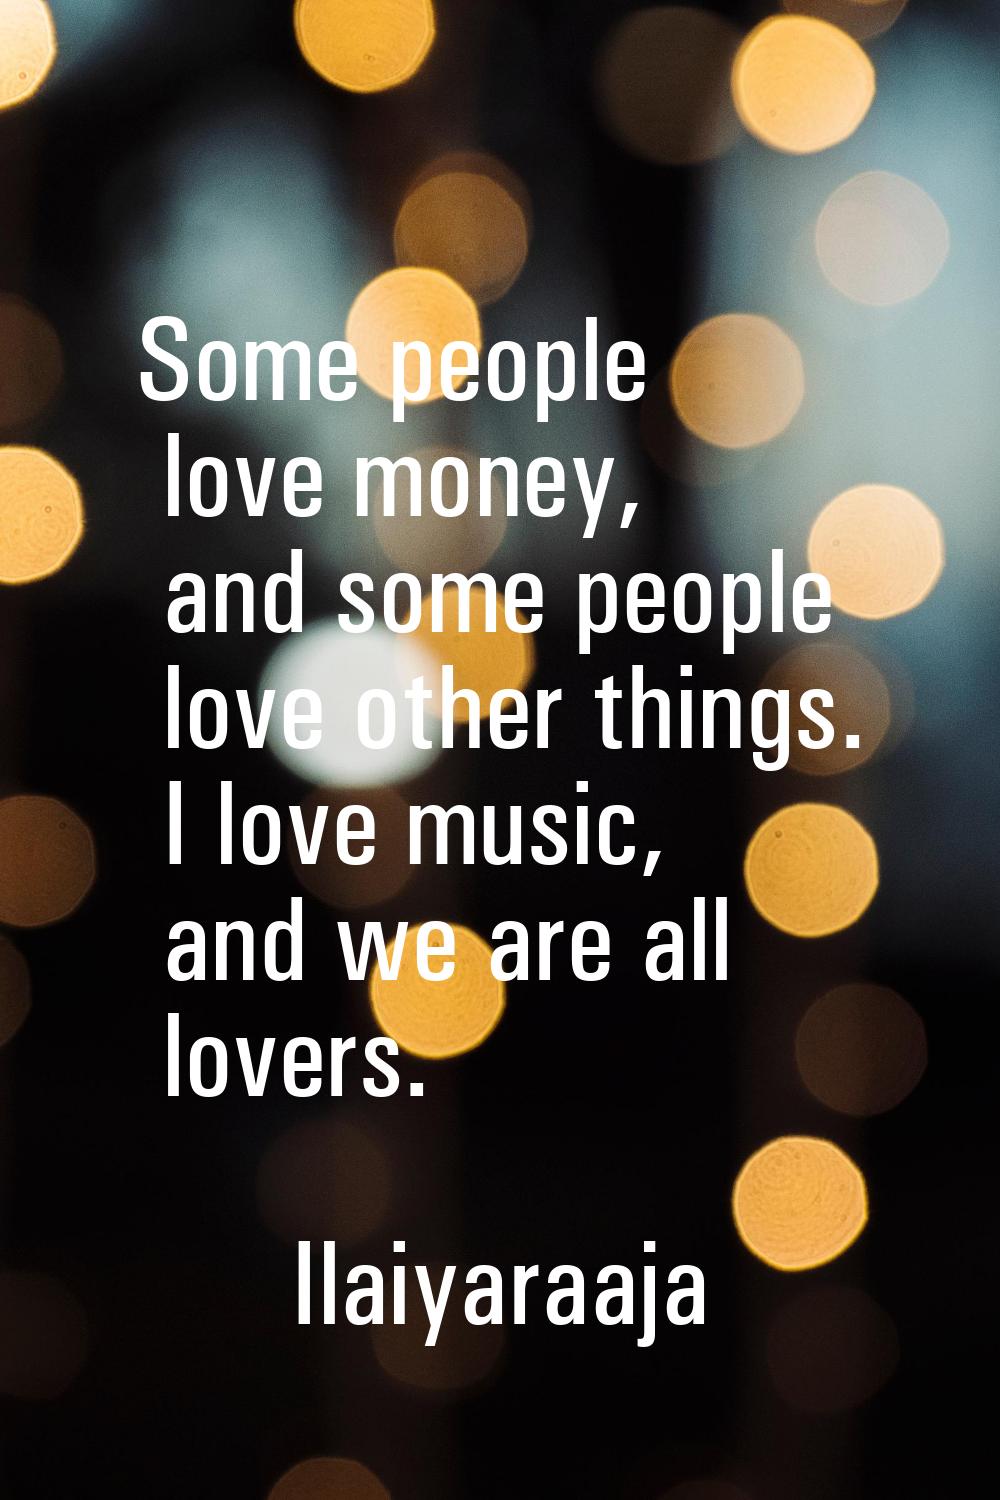 Some people love money, and some people love other things. I love music, and we are all lovers.